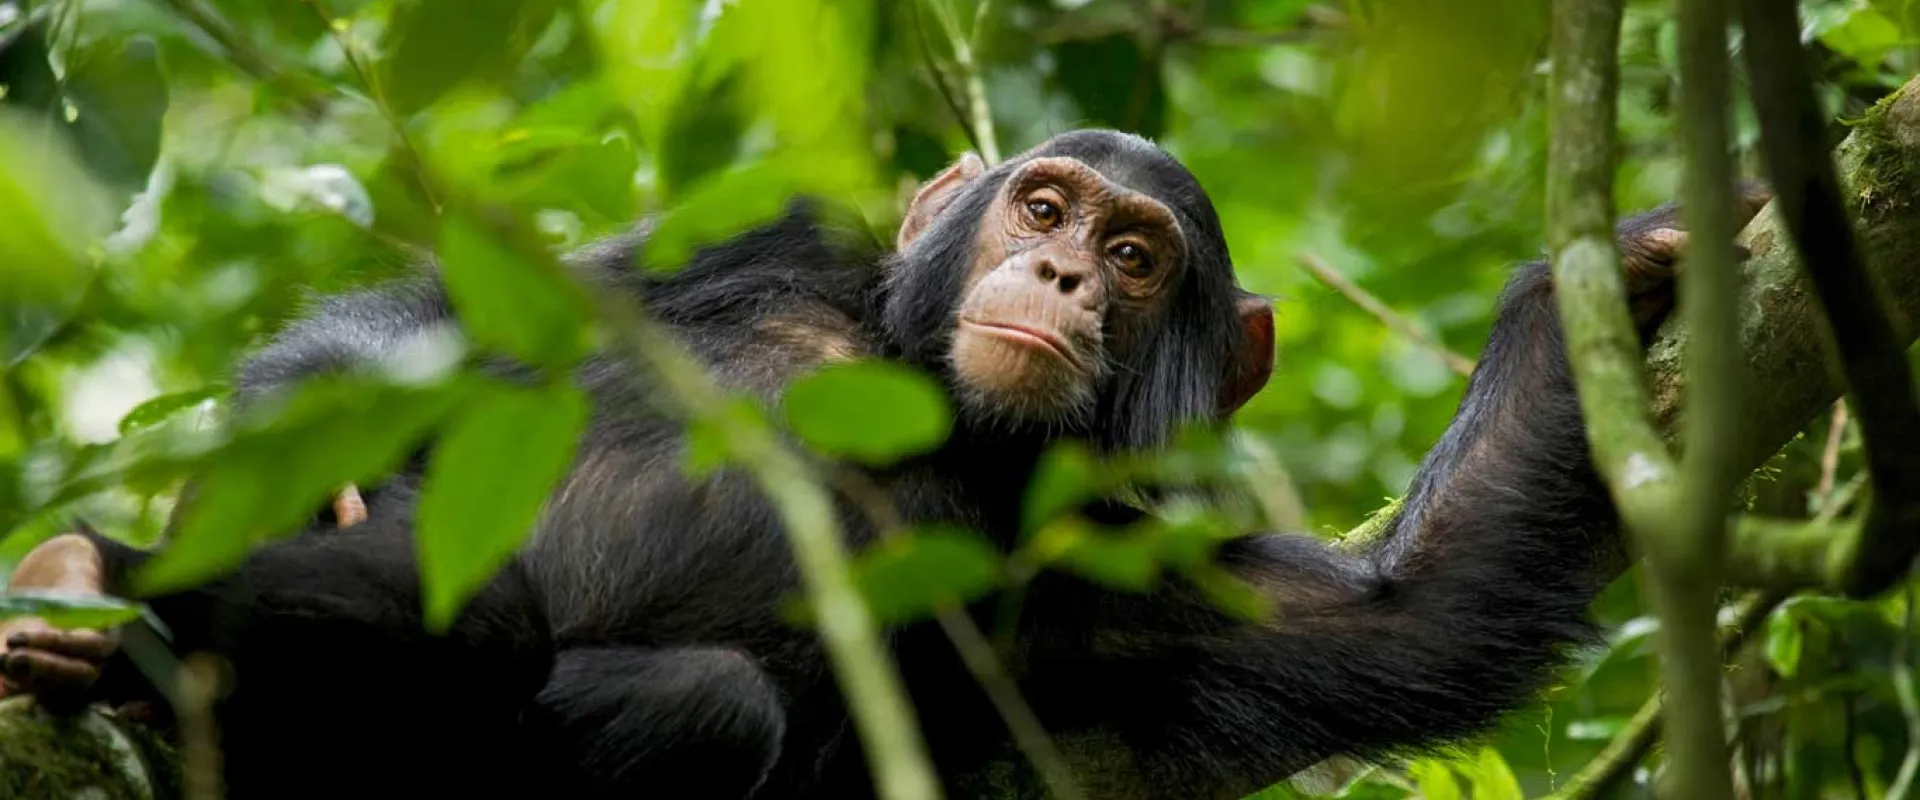 Protecting Chimpanzees from Snares